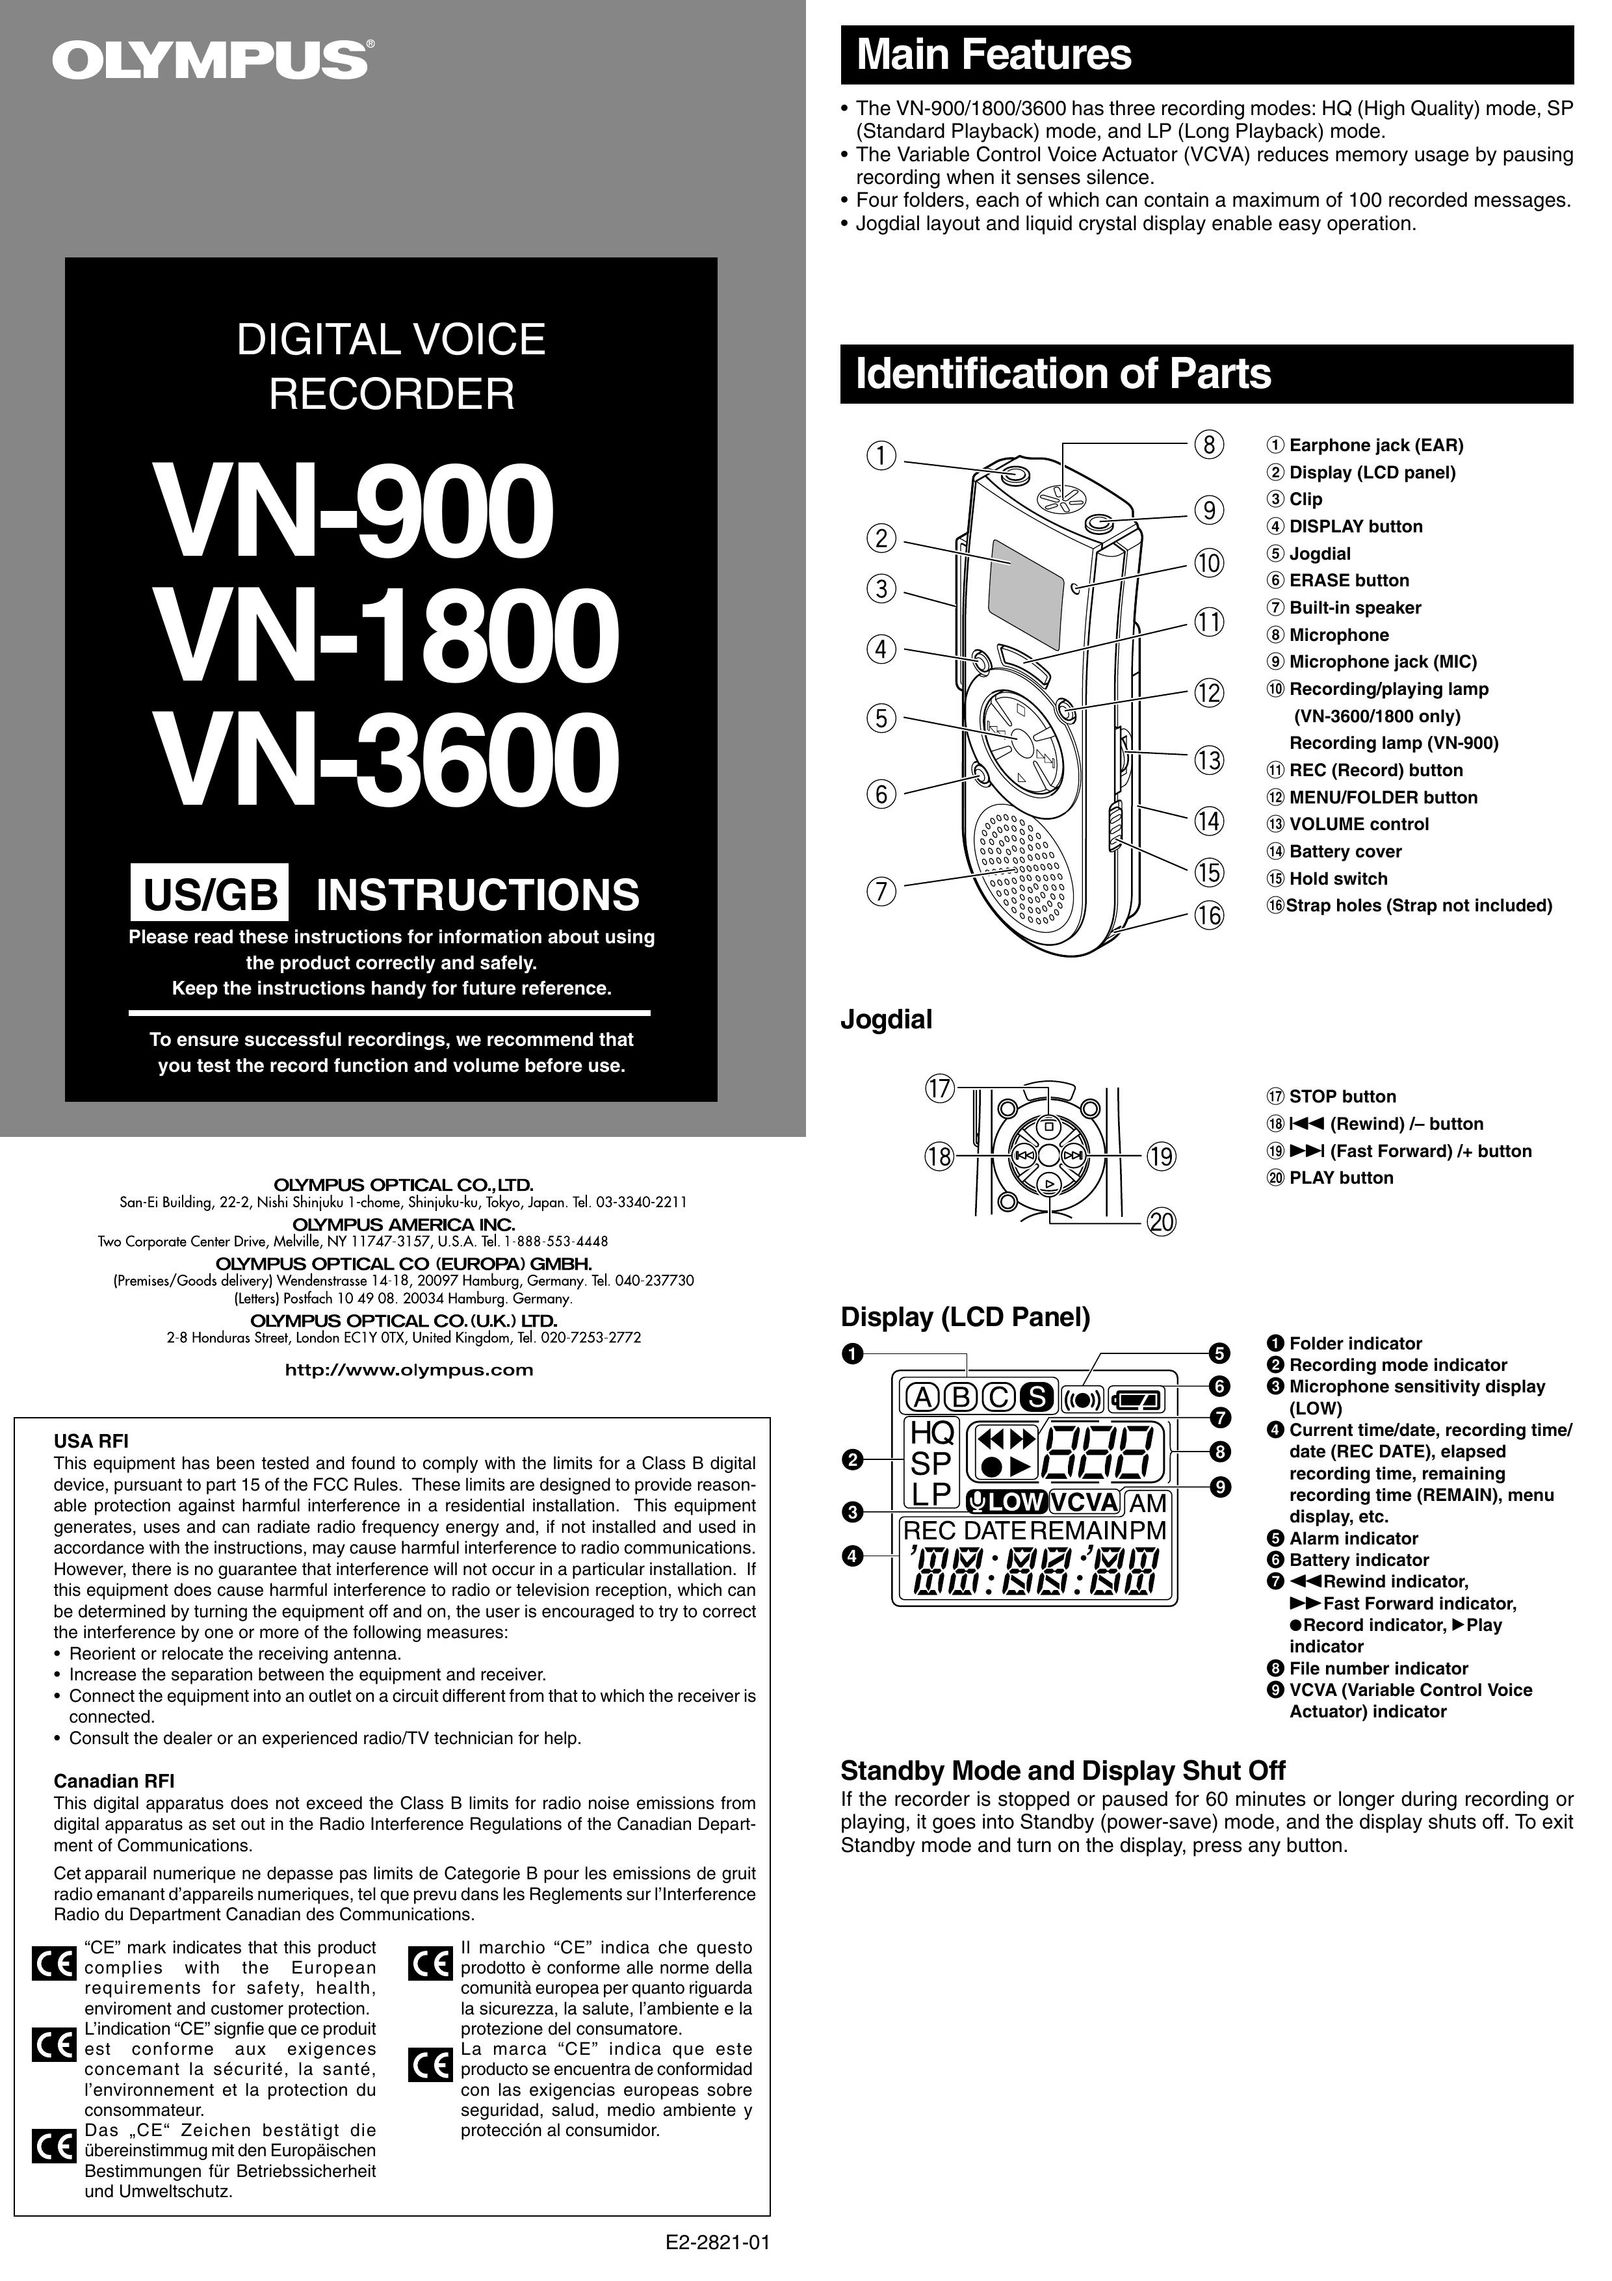 Olympus VN-1800 Double Oven User Manual